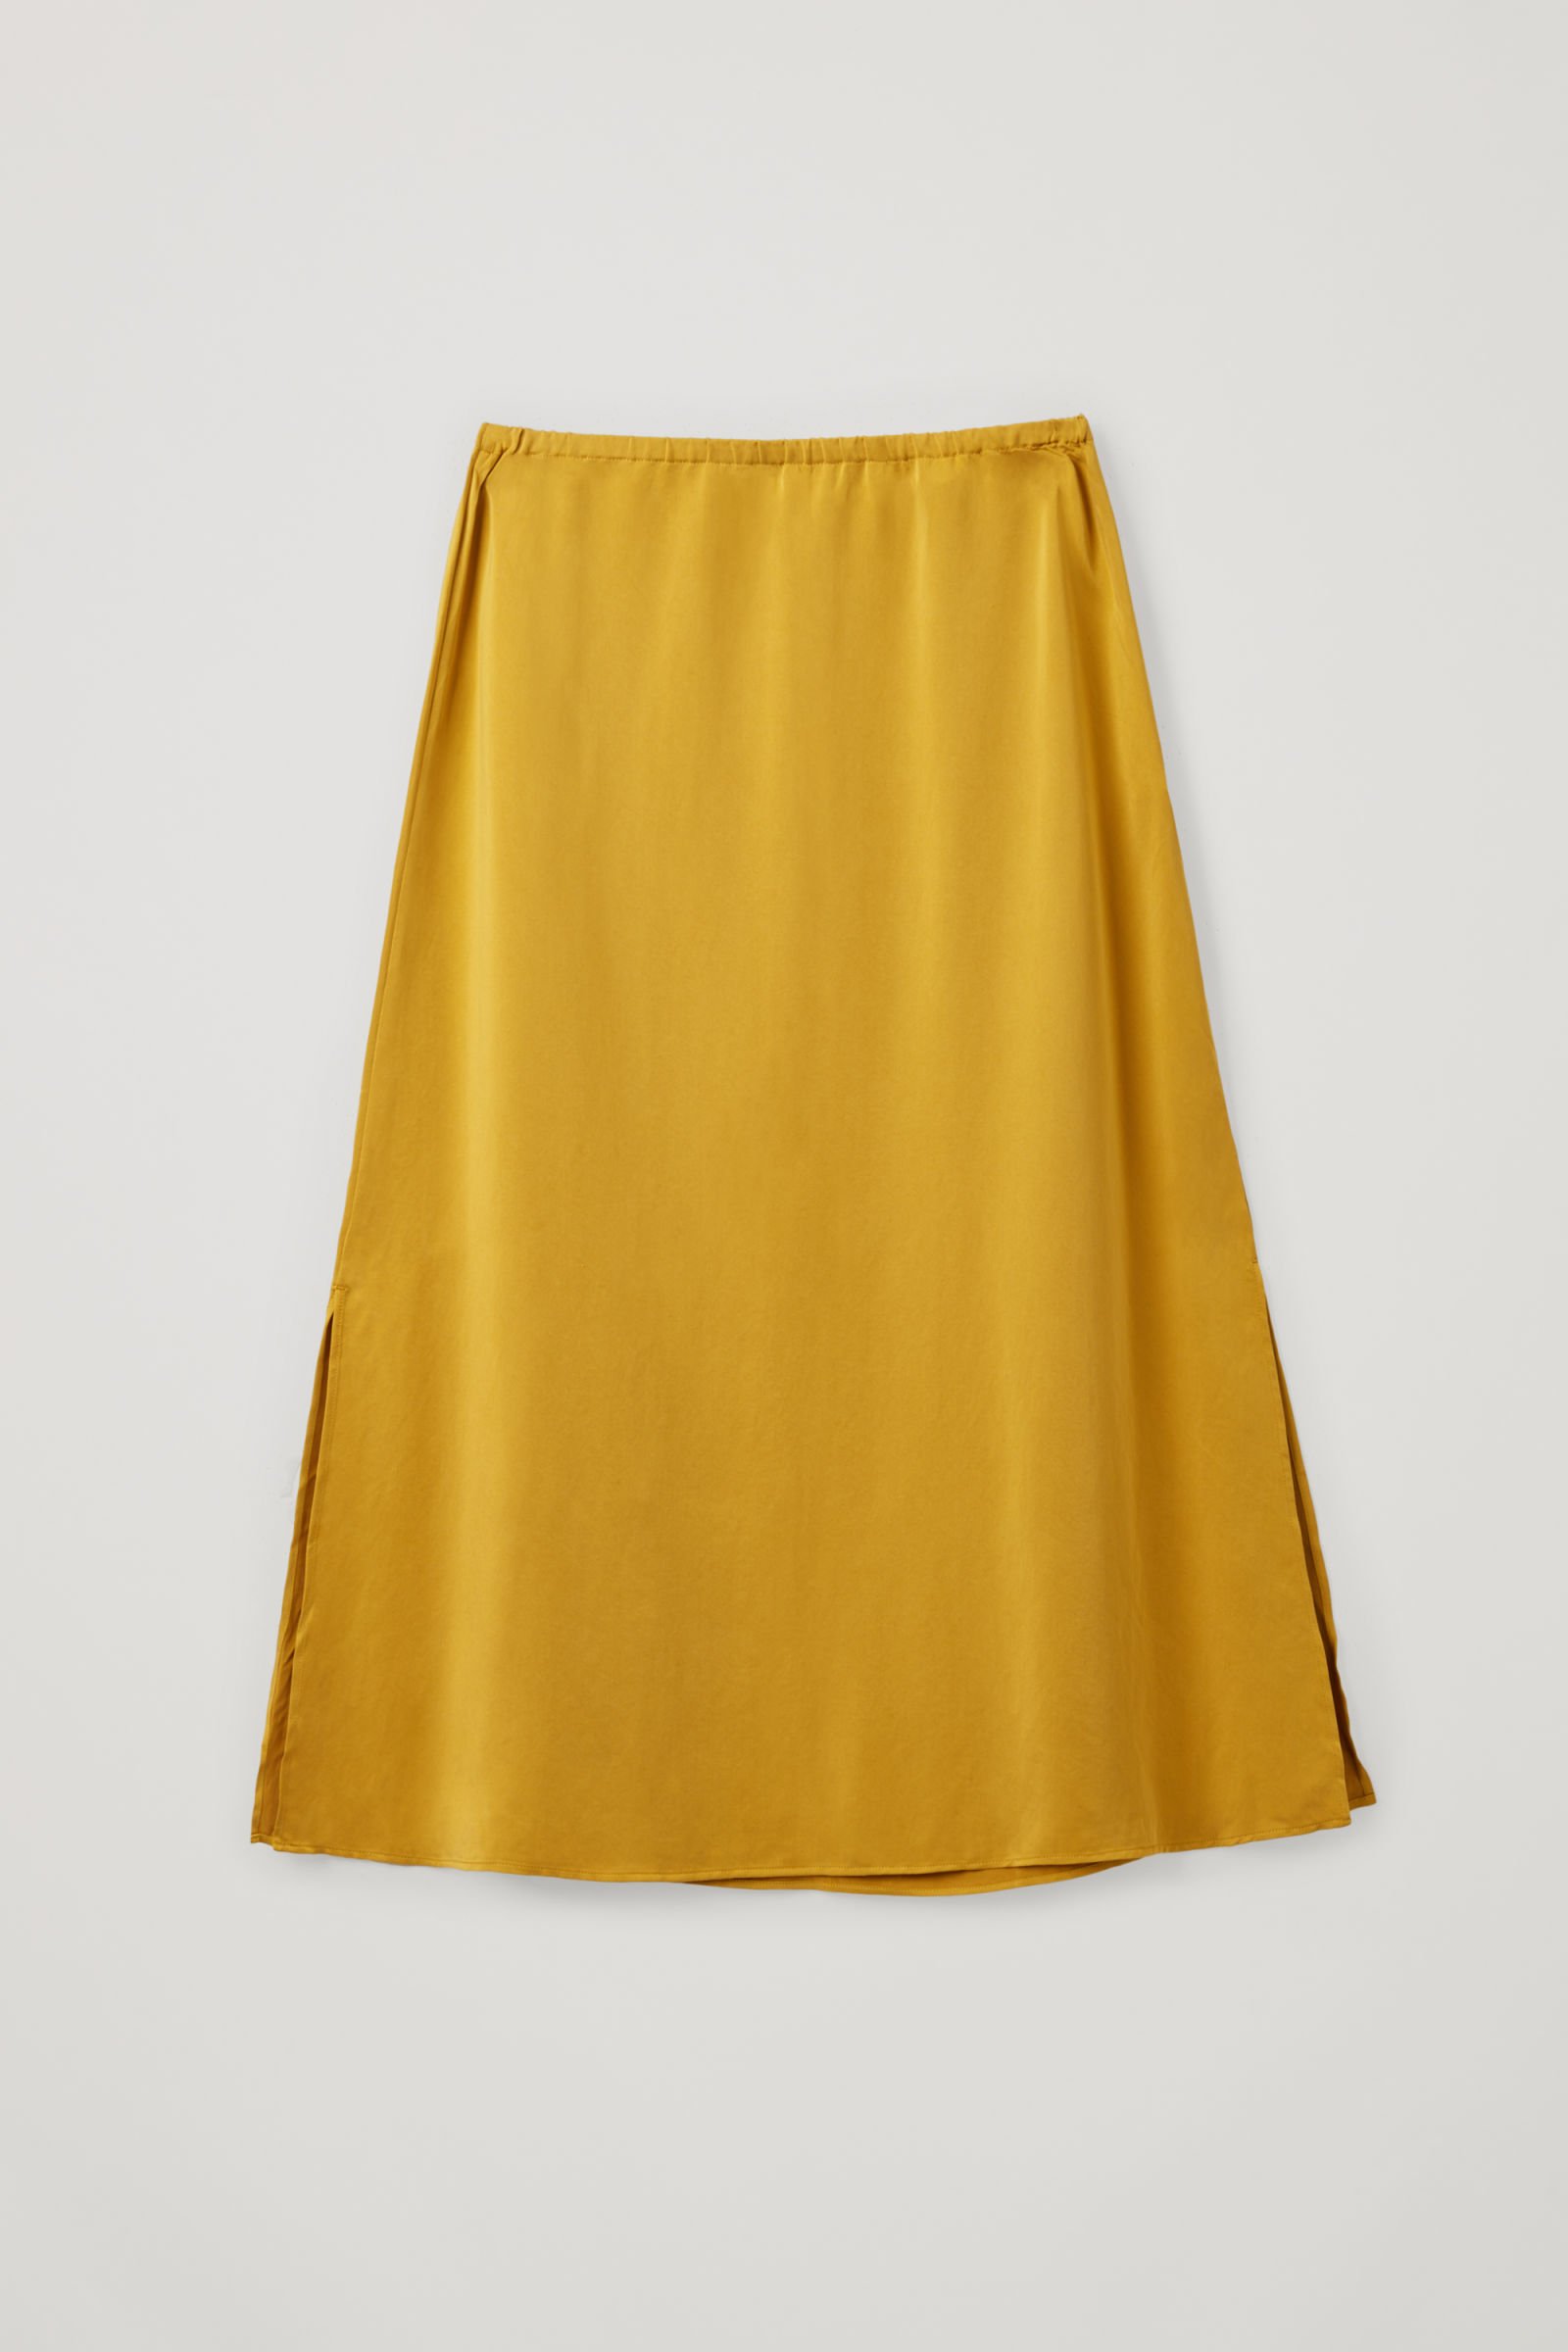 COS A-Line Covered Slit Midi Skirt in Mustard | Endource